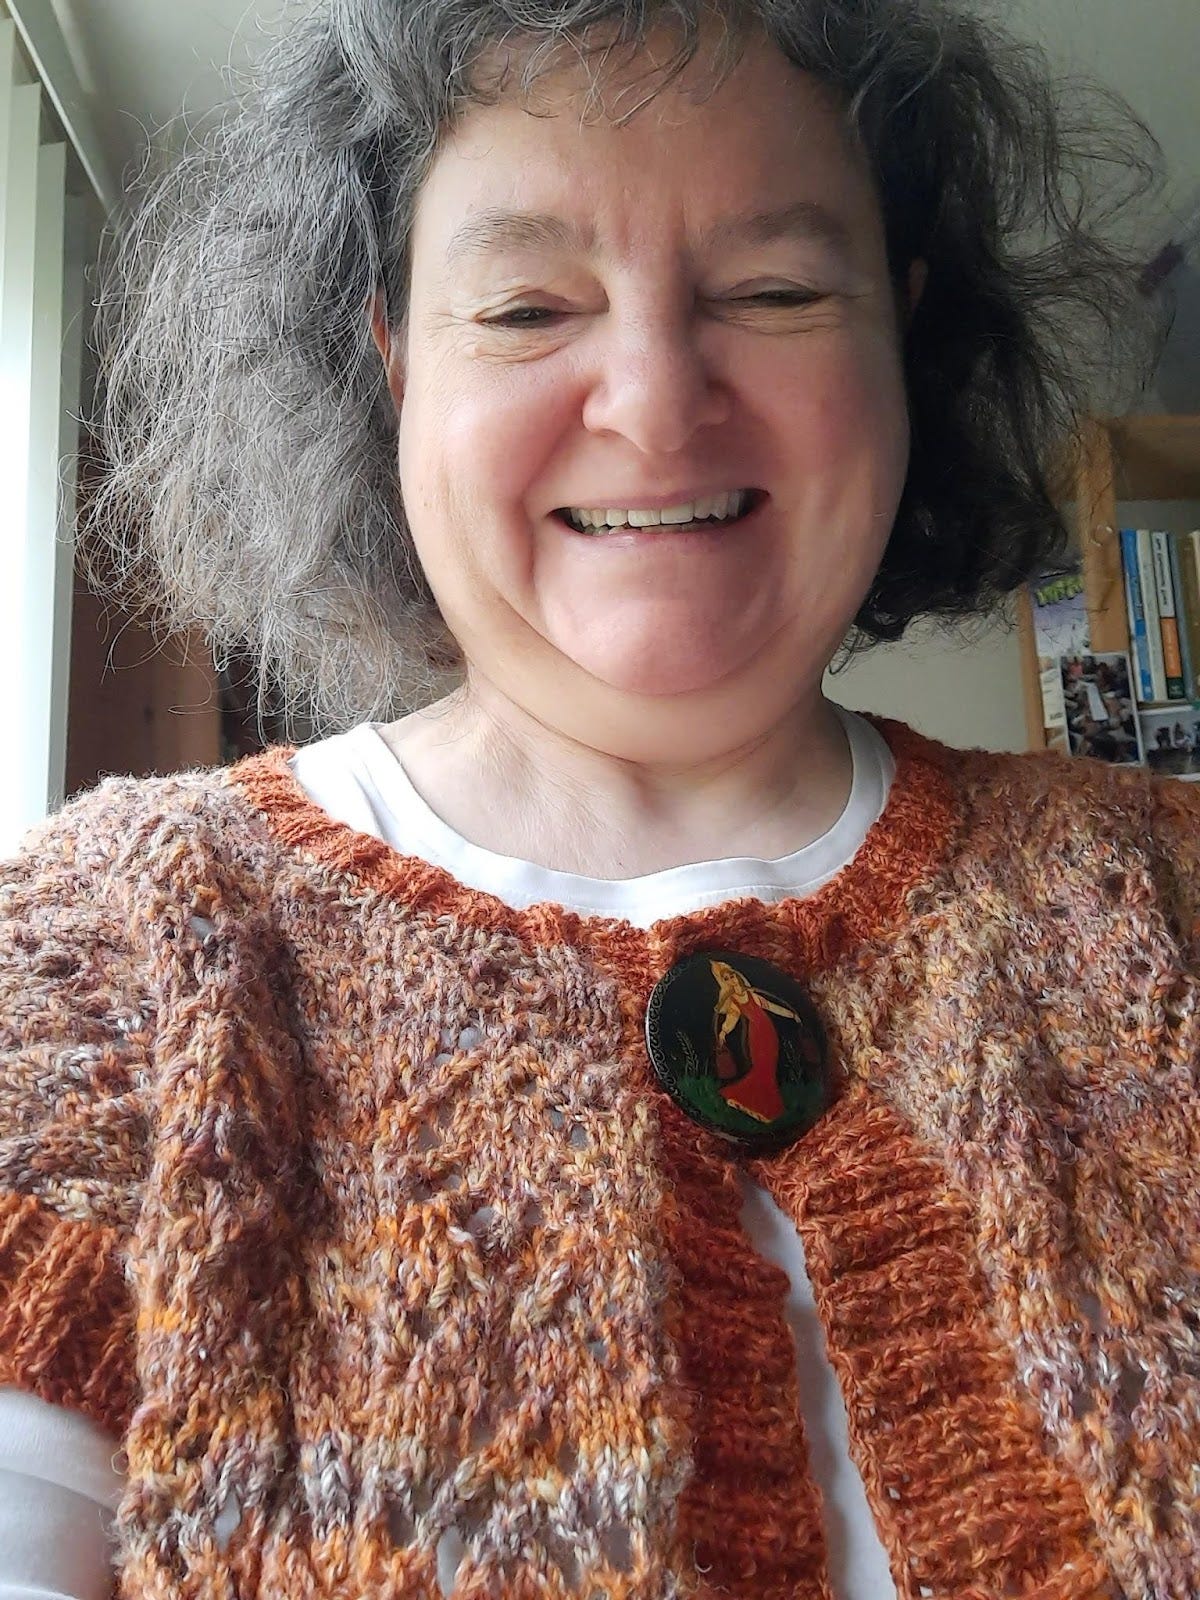 A dark haired white woman grins into the camera. She is wearing a handknitted lace top in rusty colors. She just finished knitting this top from her own handspun wool.